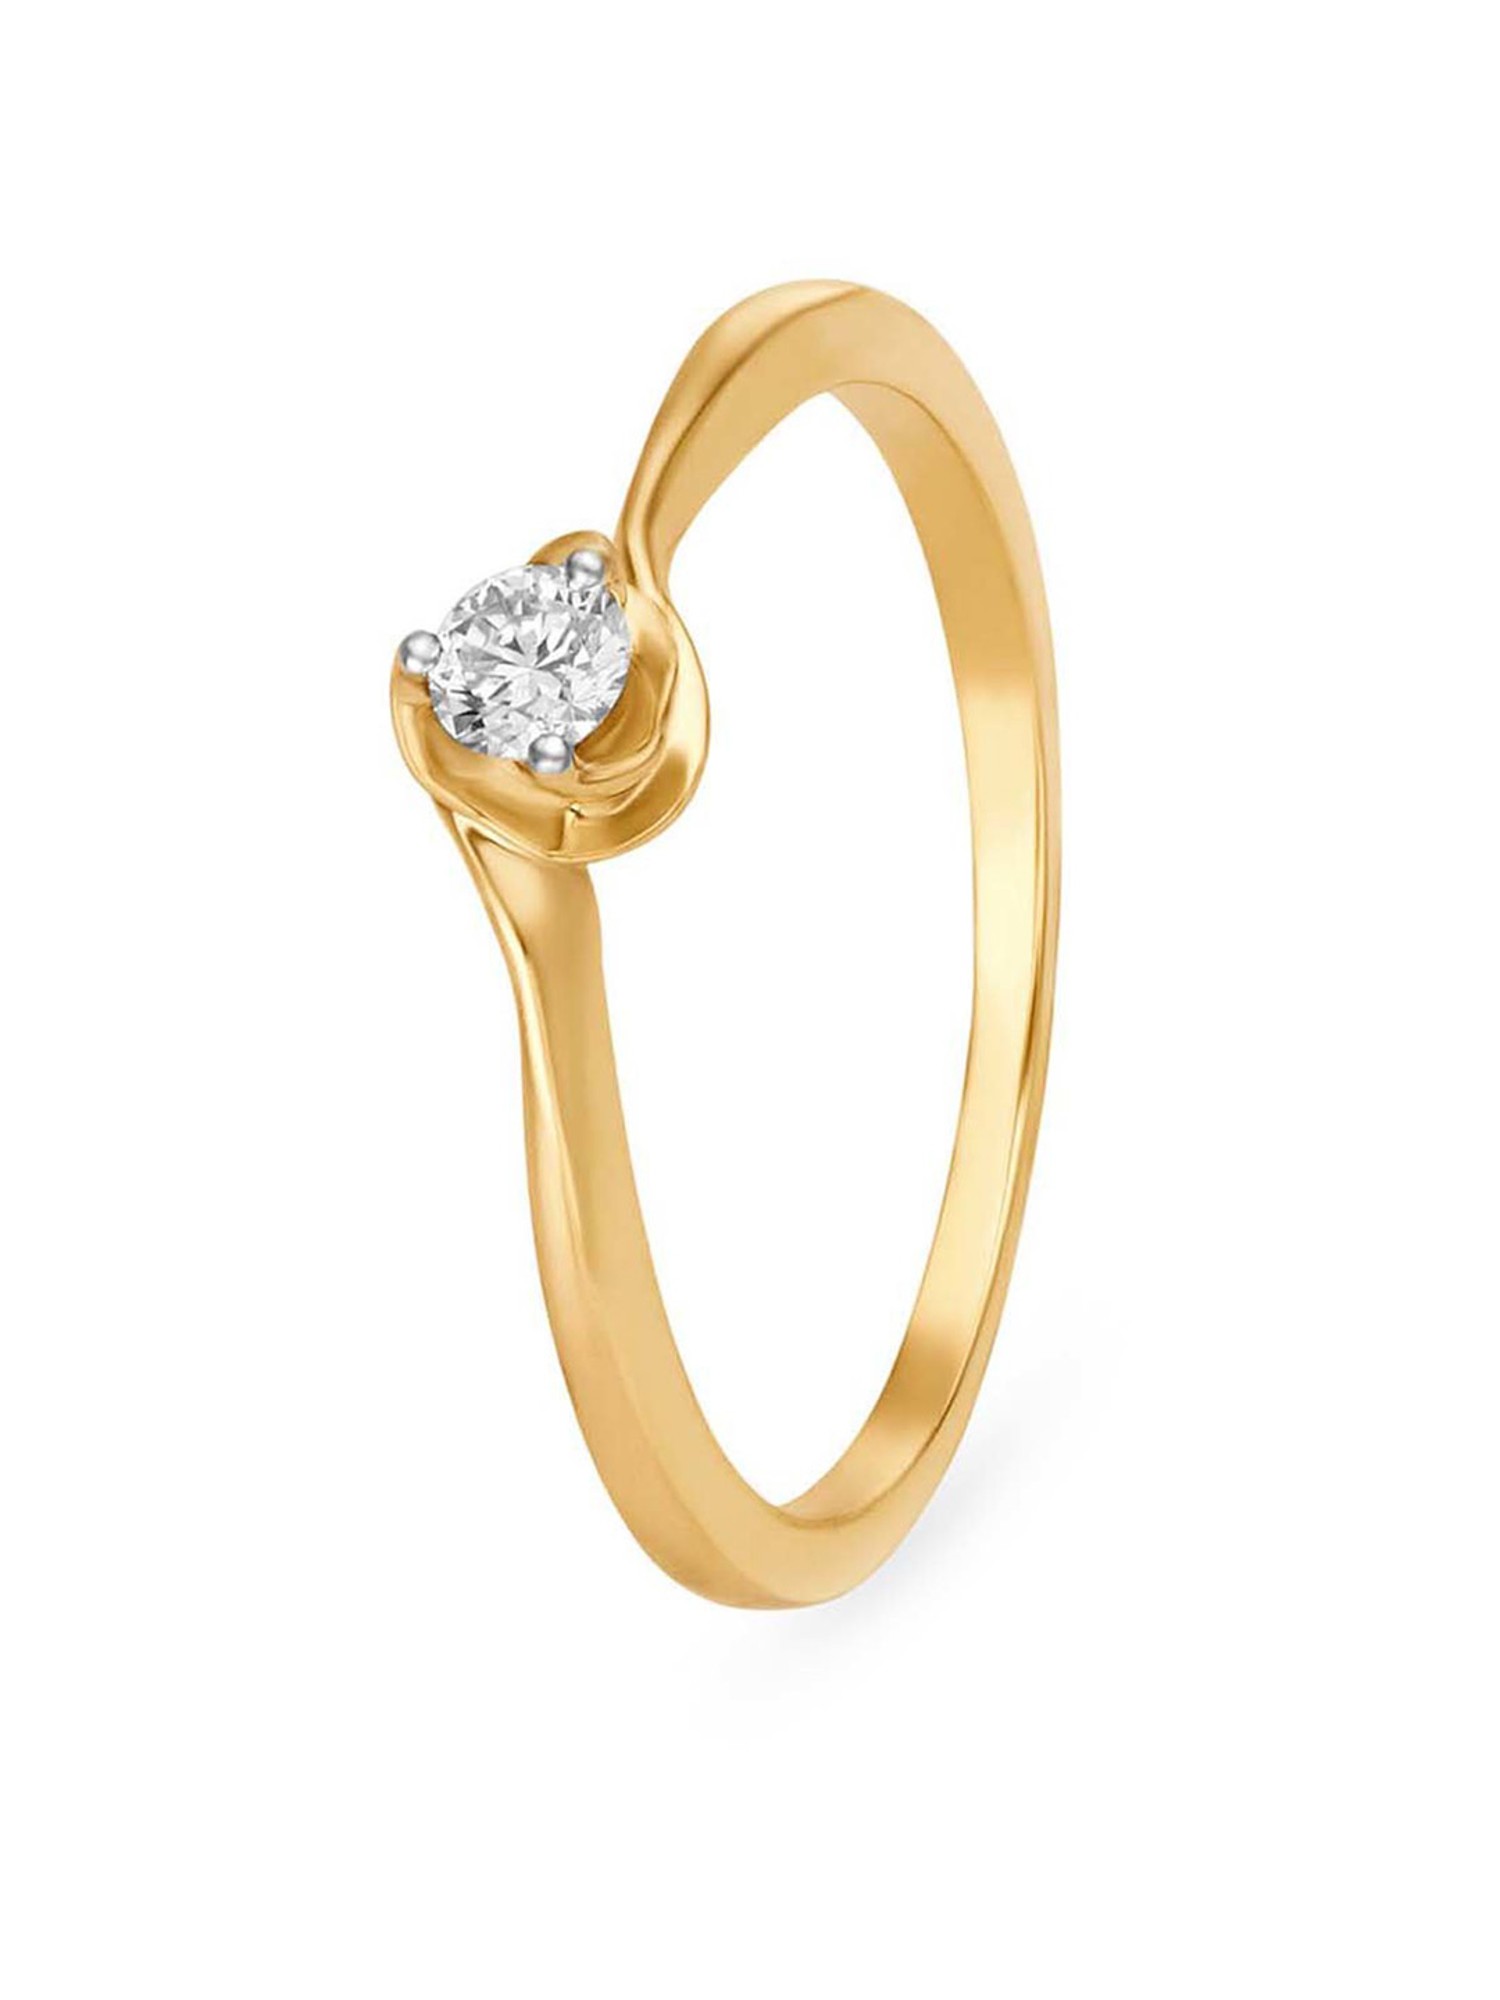 Delicate Contemporary Gold Ring